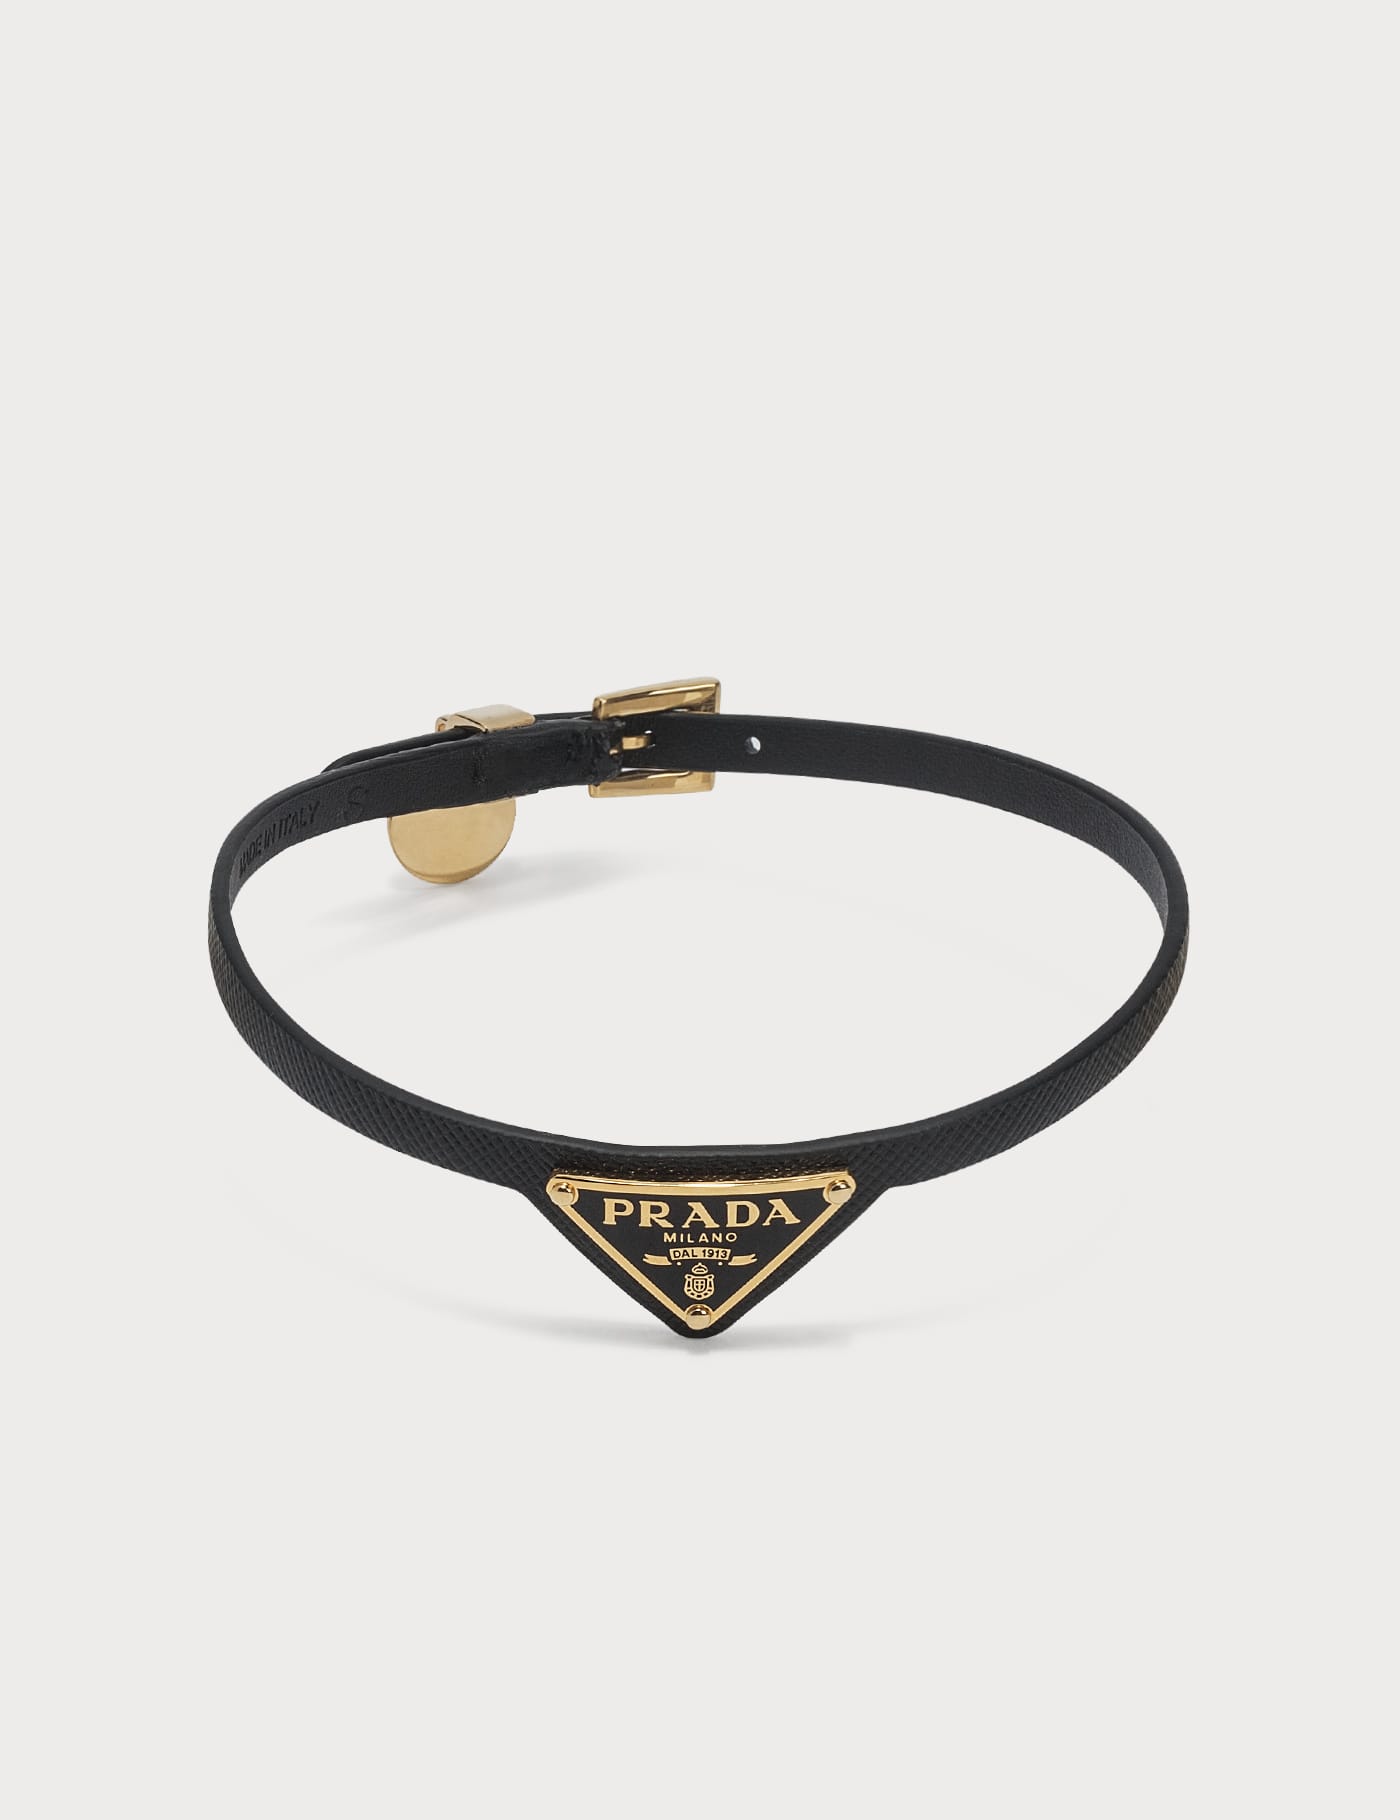 Prada strikes gold with a new eco-friendly jewelry launch made with 100%  recycled gold - Global Design News